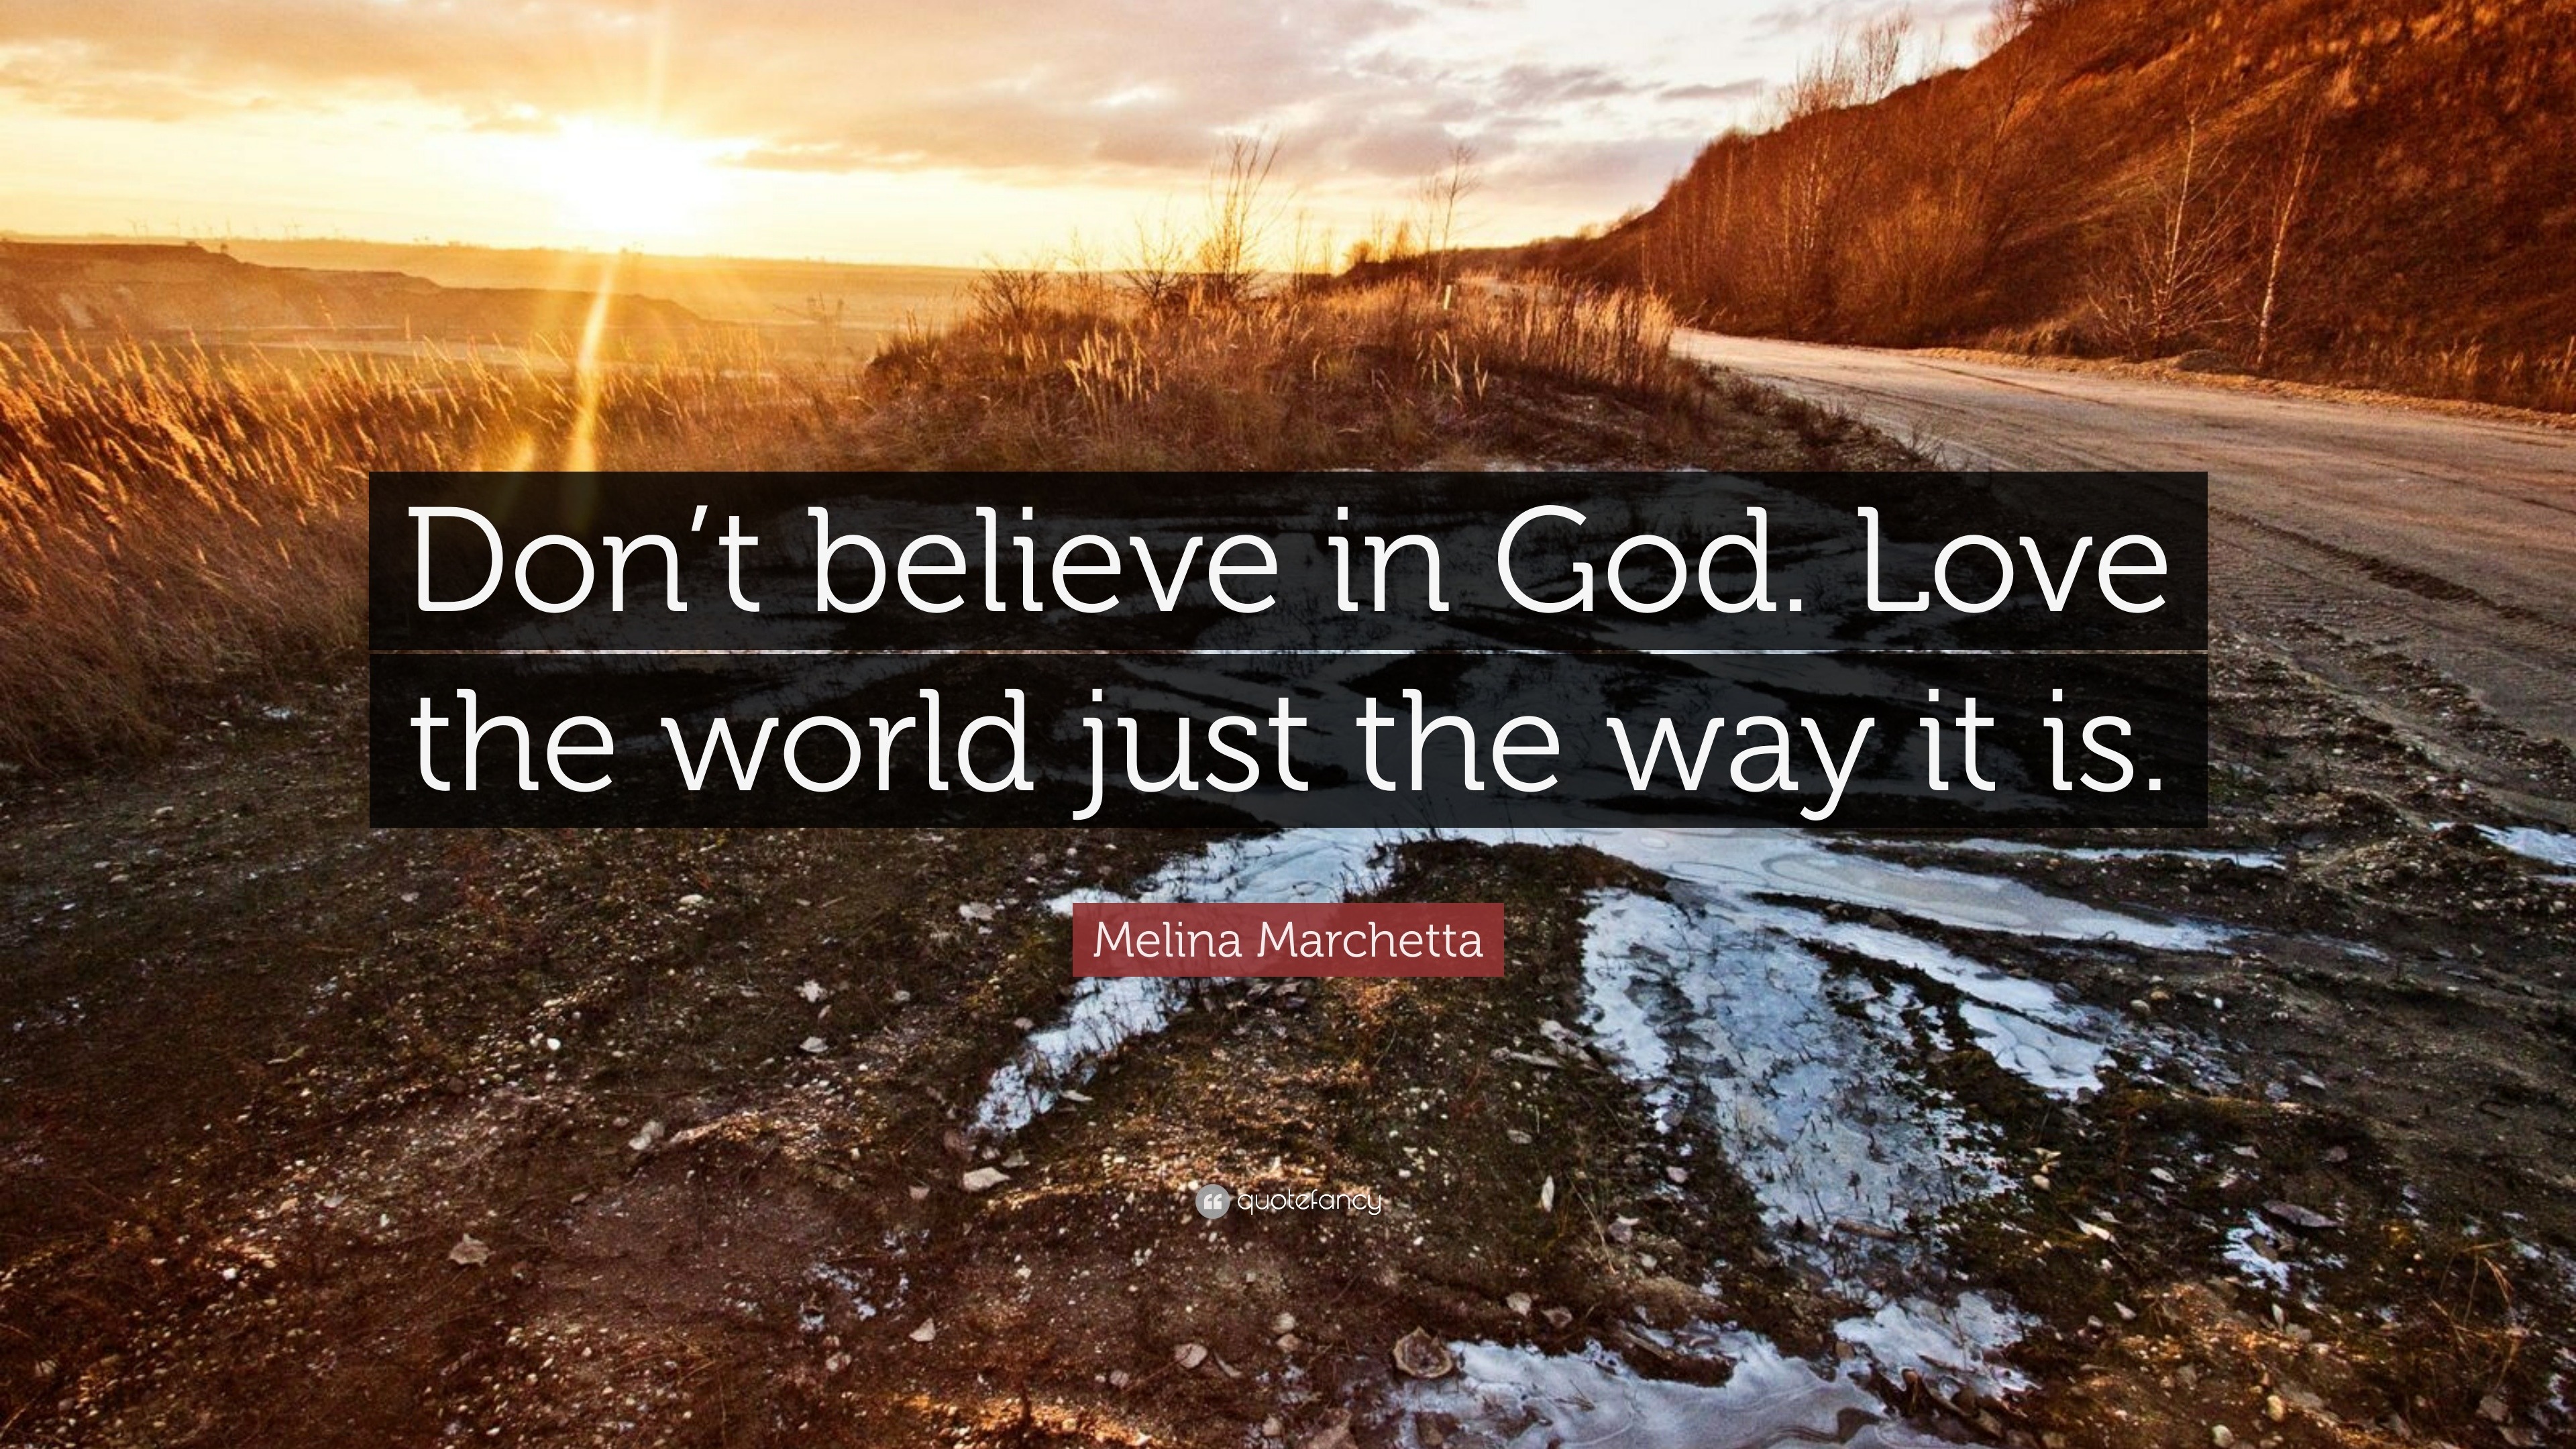 Melina Marchetta Quote “Don t believe in God Love the world just